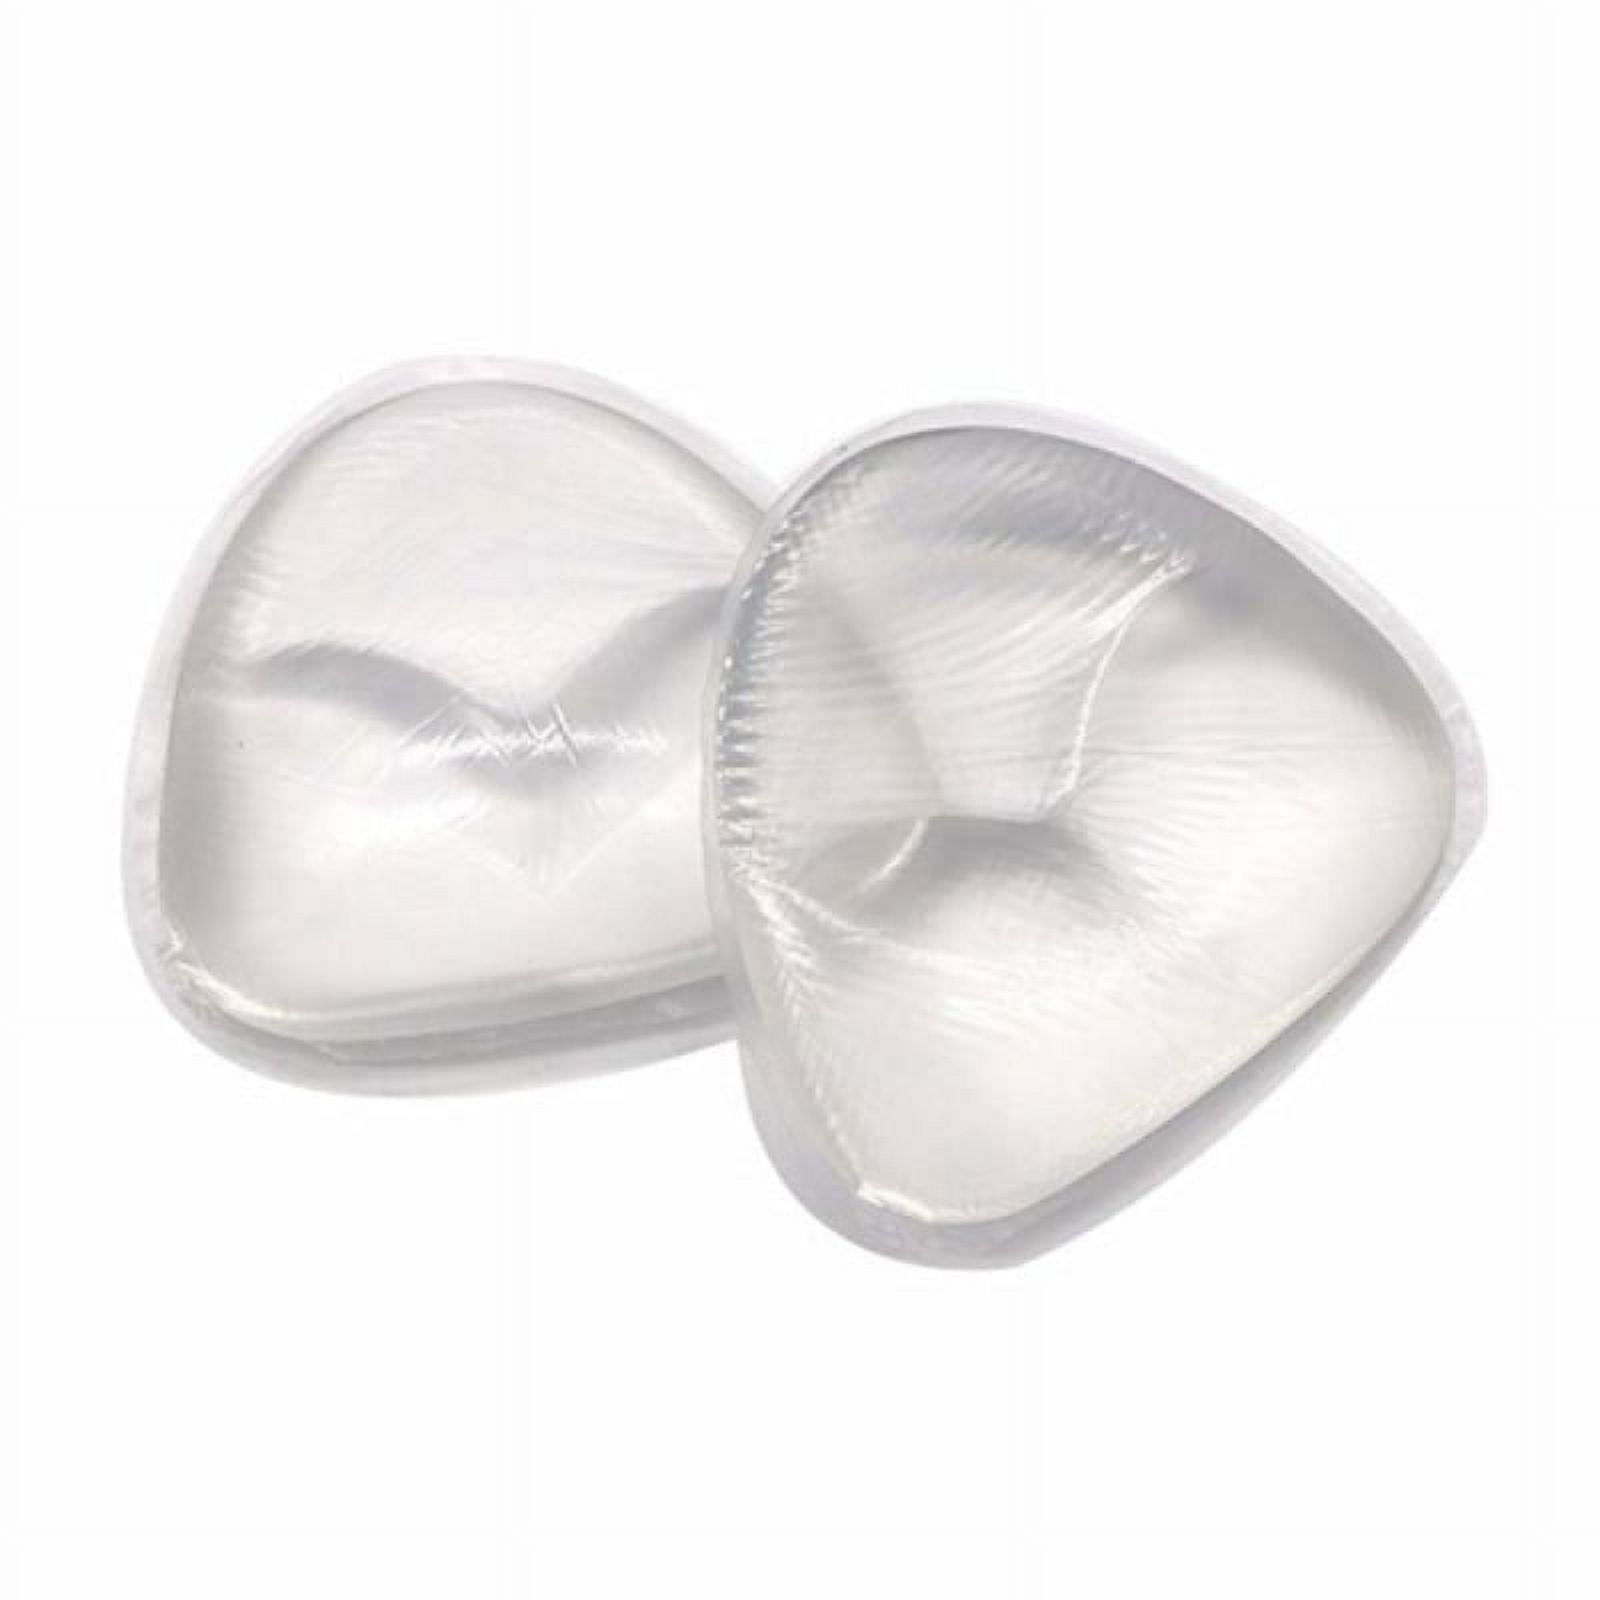 Nudwear Silicone Bra Pads Inserts - Lightweight Chicken Cutlet Bra Inserts  Increase Bust by 1 Cup Size - Breathable Silicone Breast Inserts, Tapered  Edge Provide a Natural, Discreet Size: M/L (B/C) in